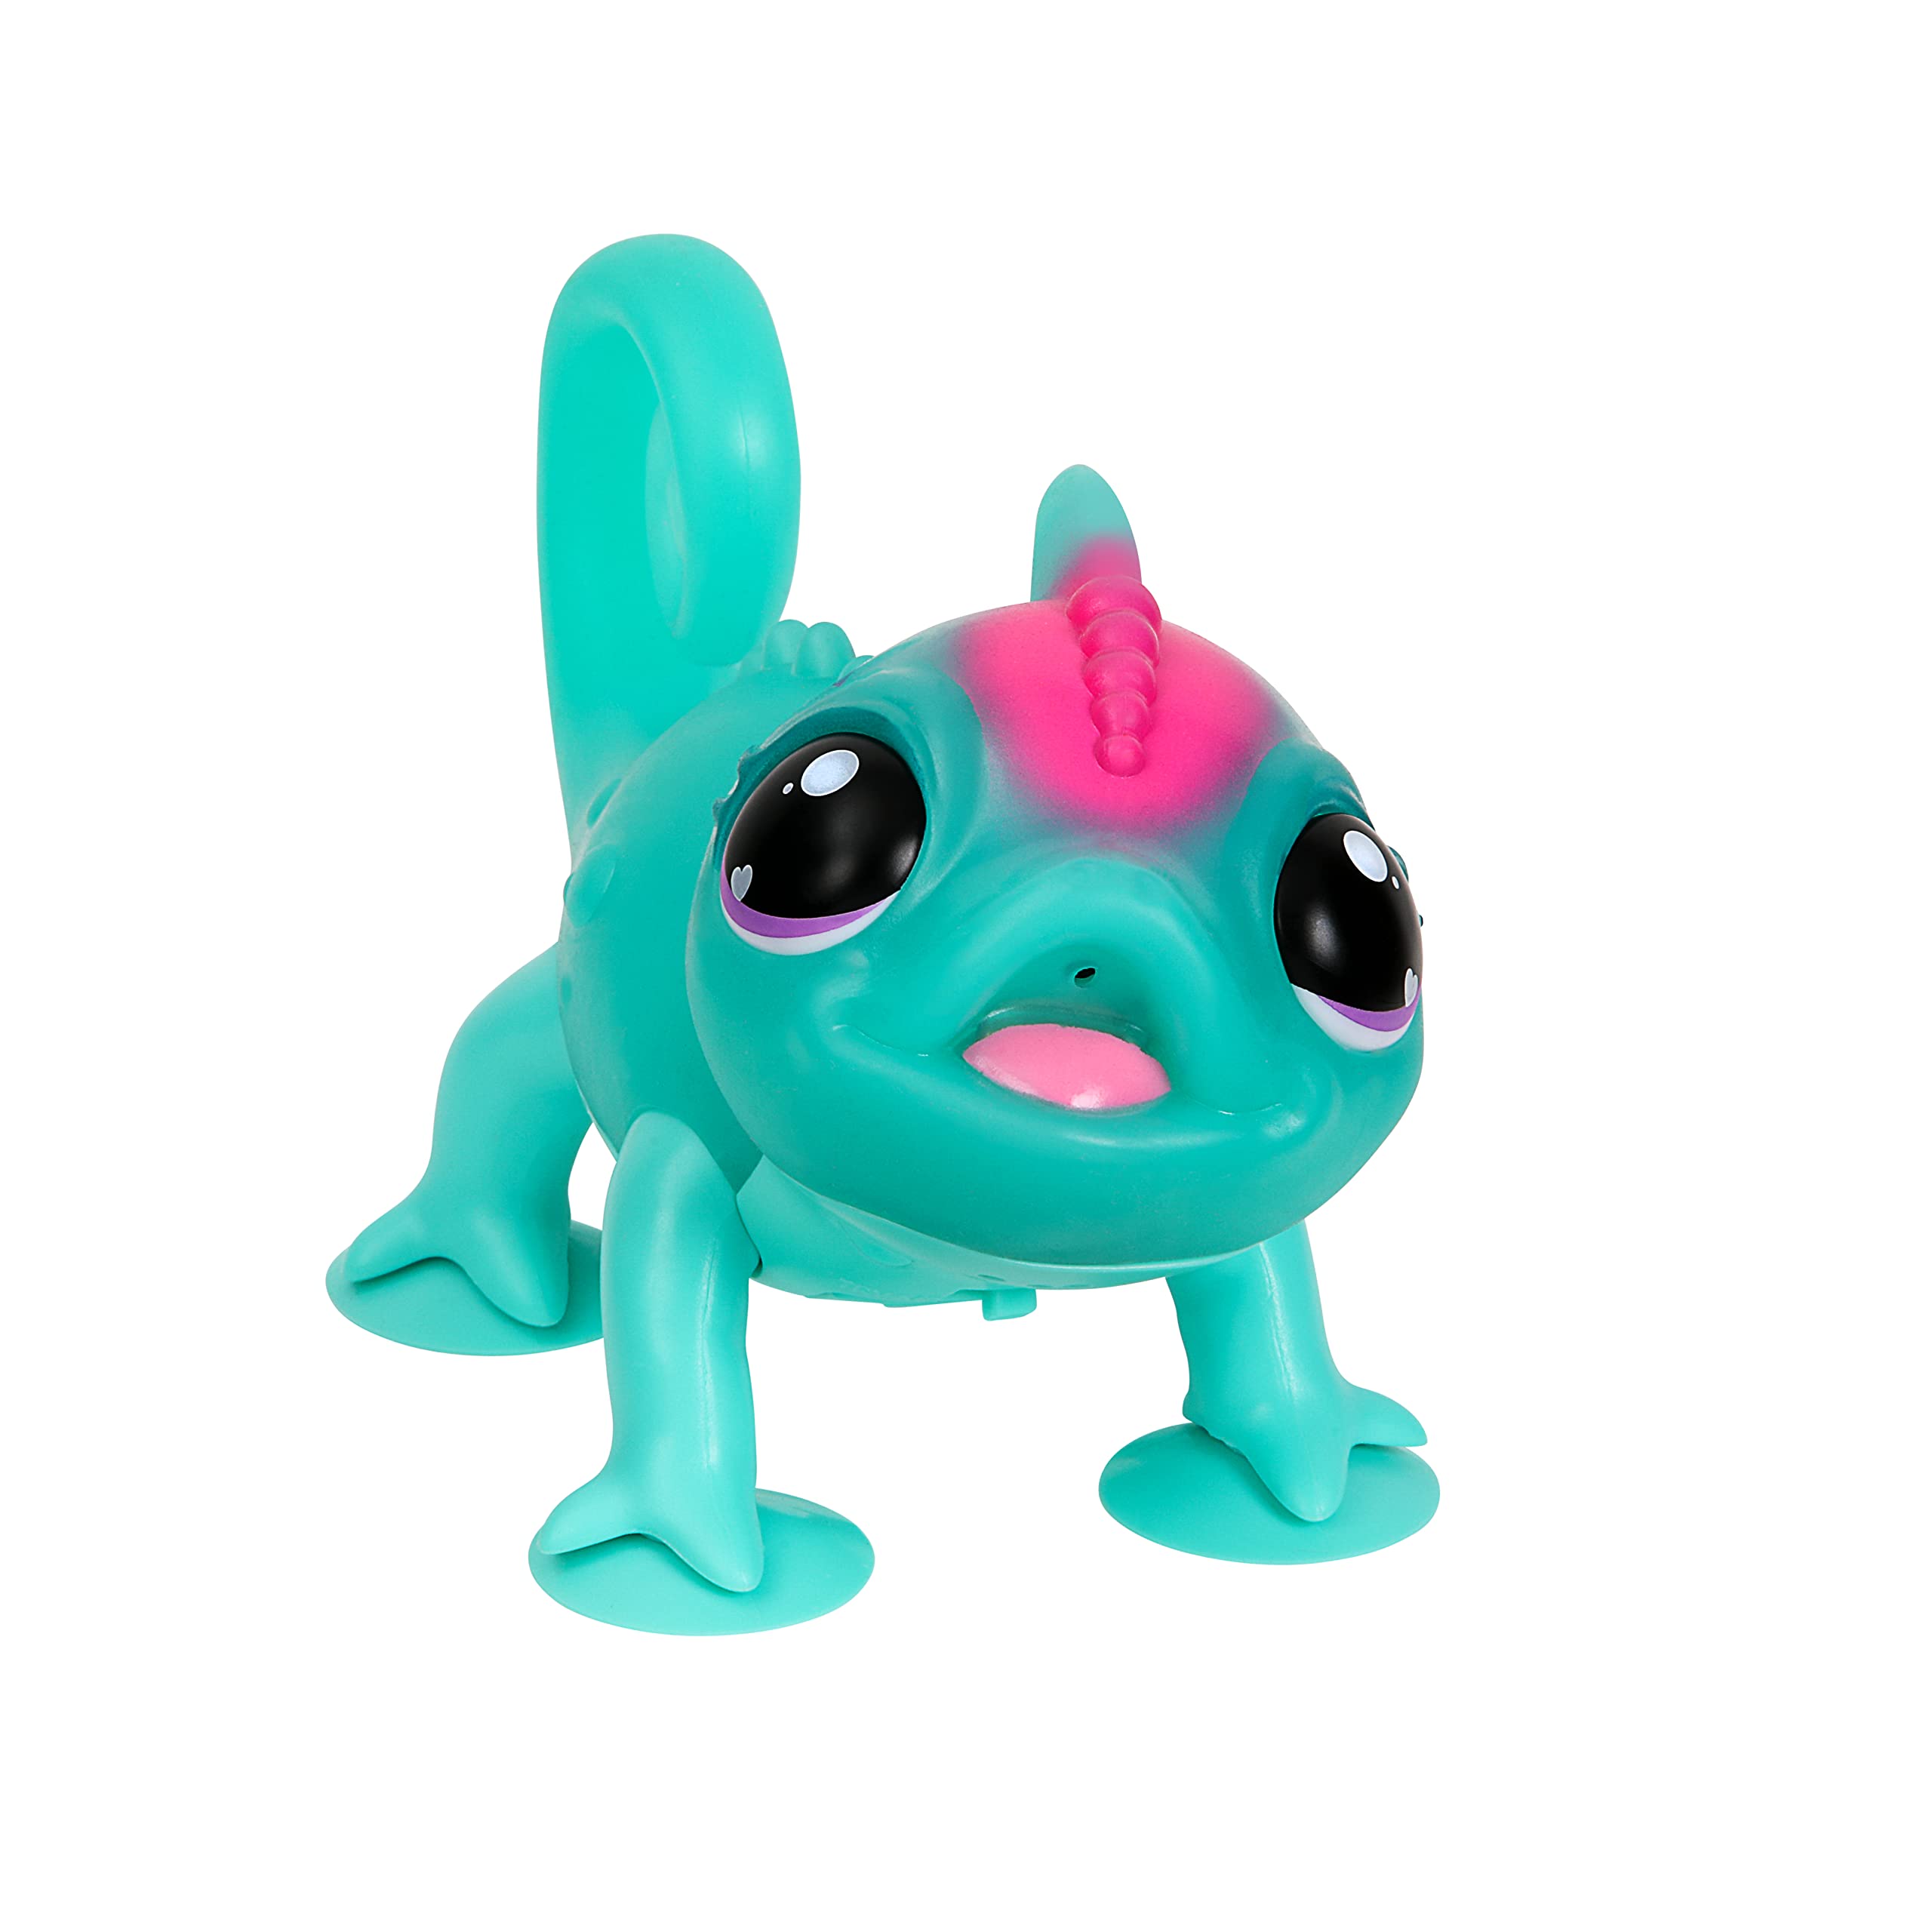 Amazon - Little Live Pets Chameleon Interactive Color-Changing Light-Up Toy $14.39